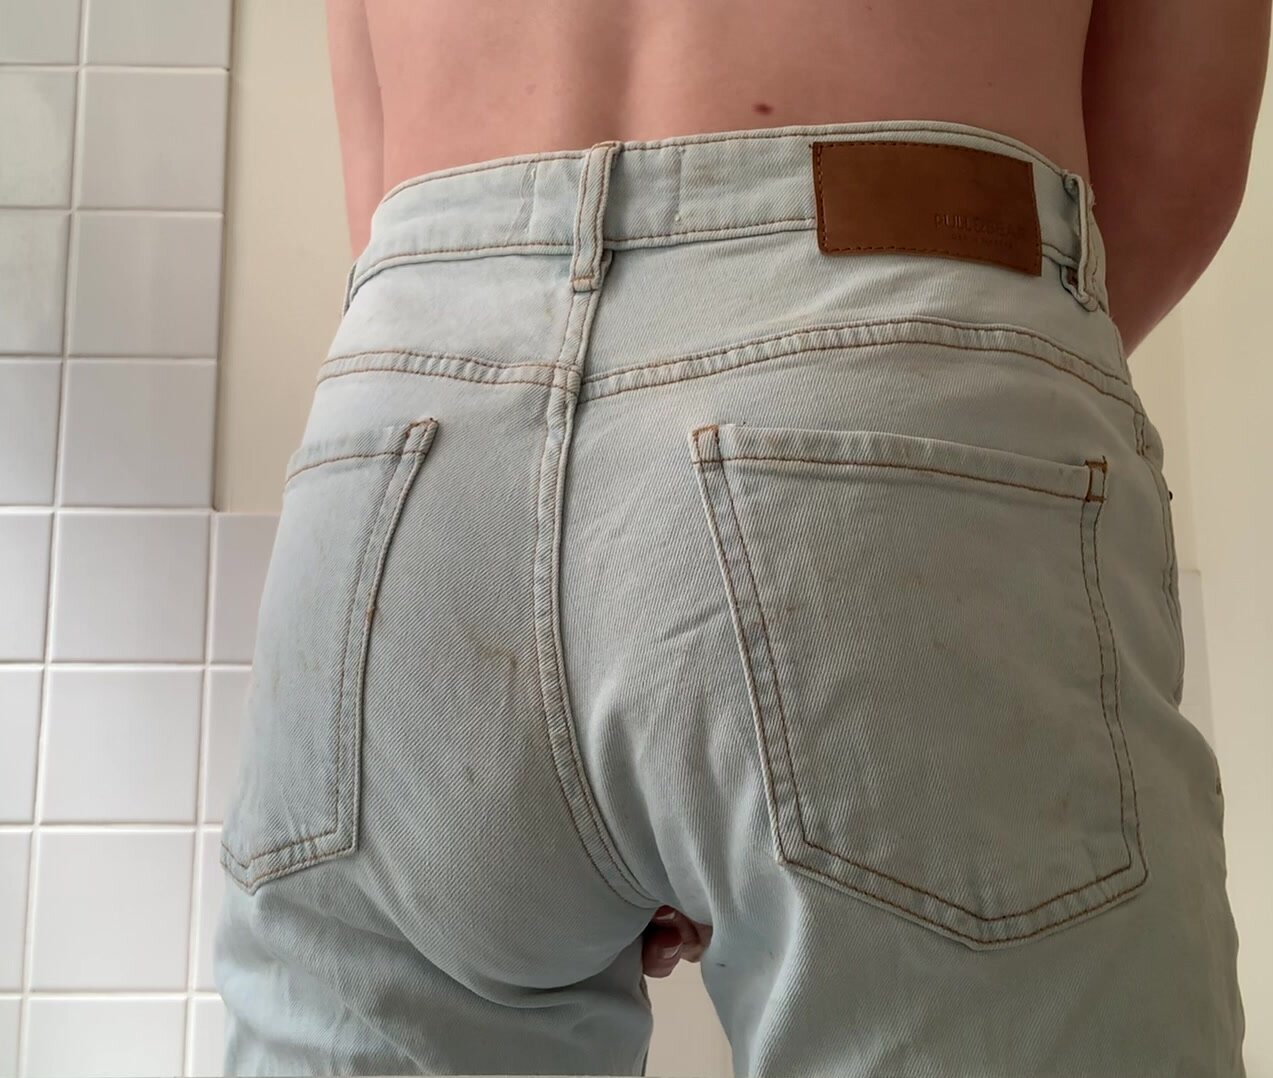 Another messy jeans poop